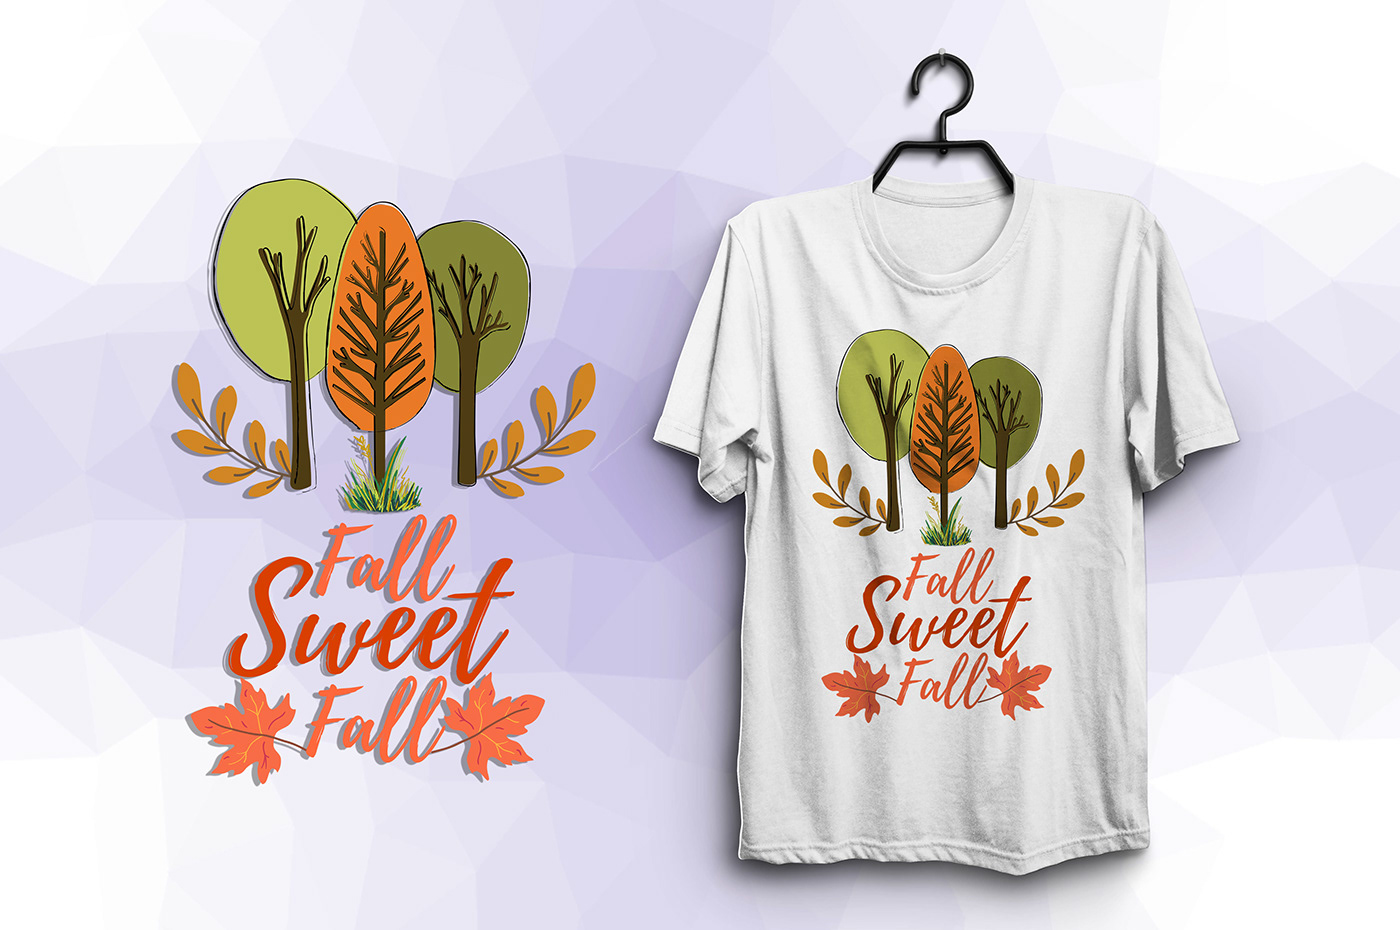 Extraordinary beautiful Fall session tshirt design shirts are beautiful and attractive for everyone